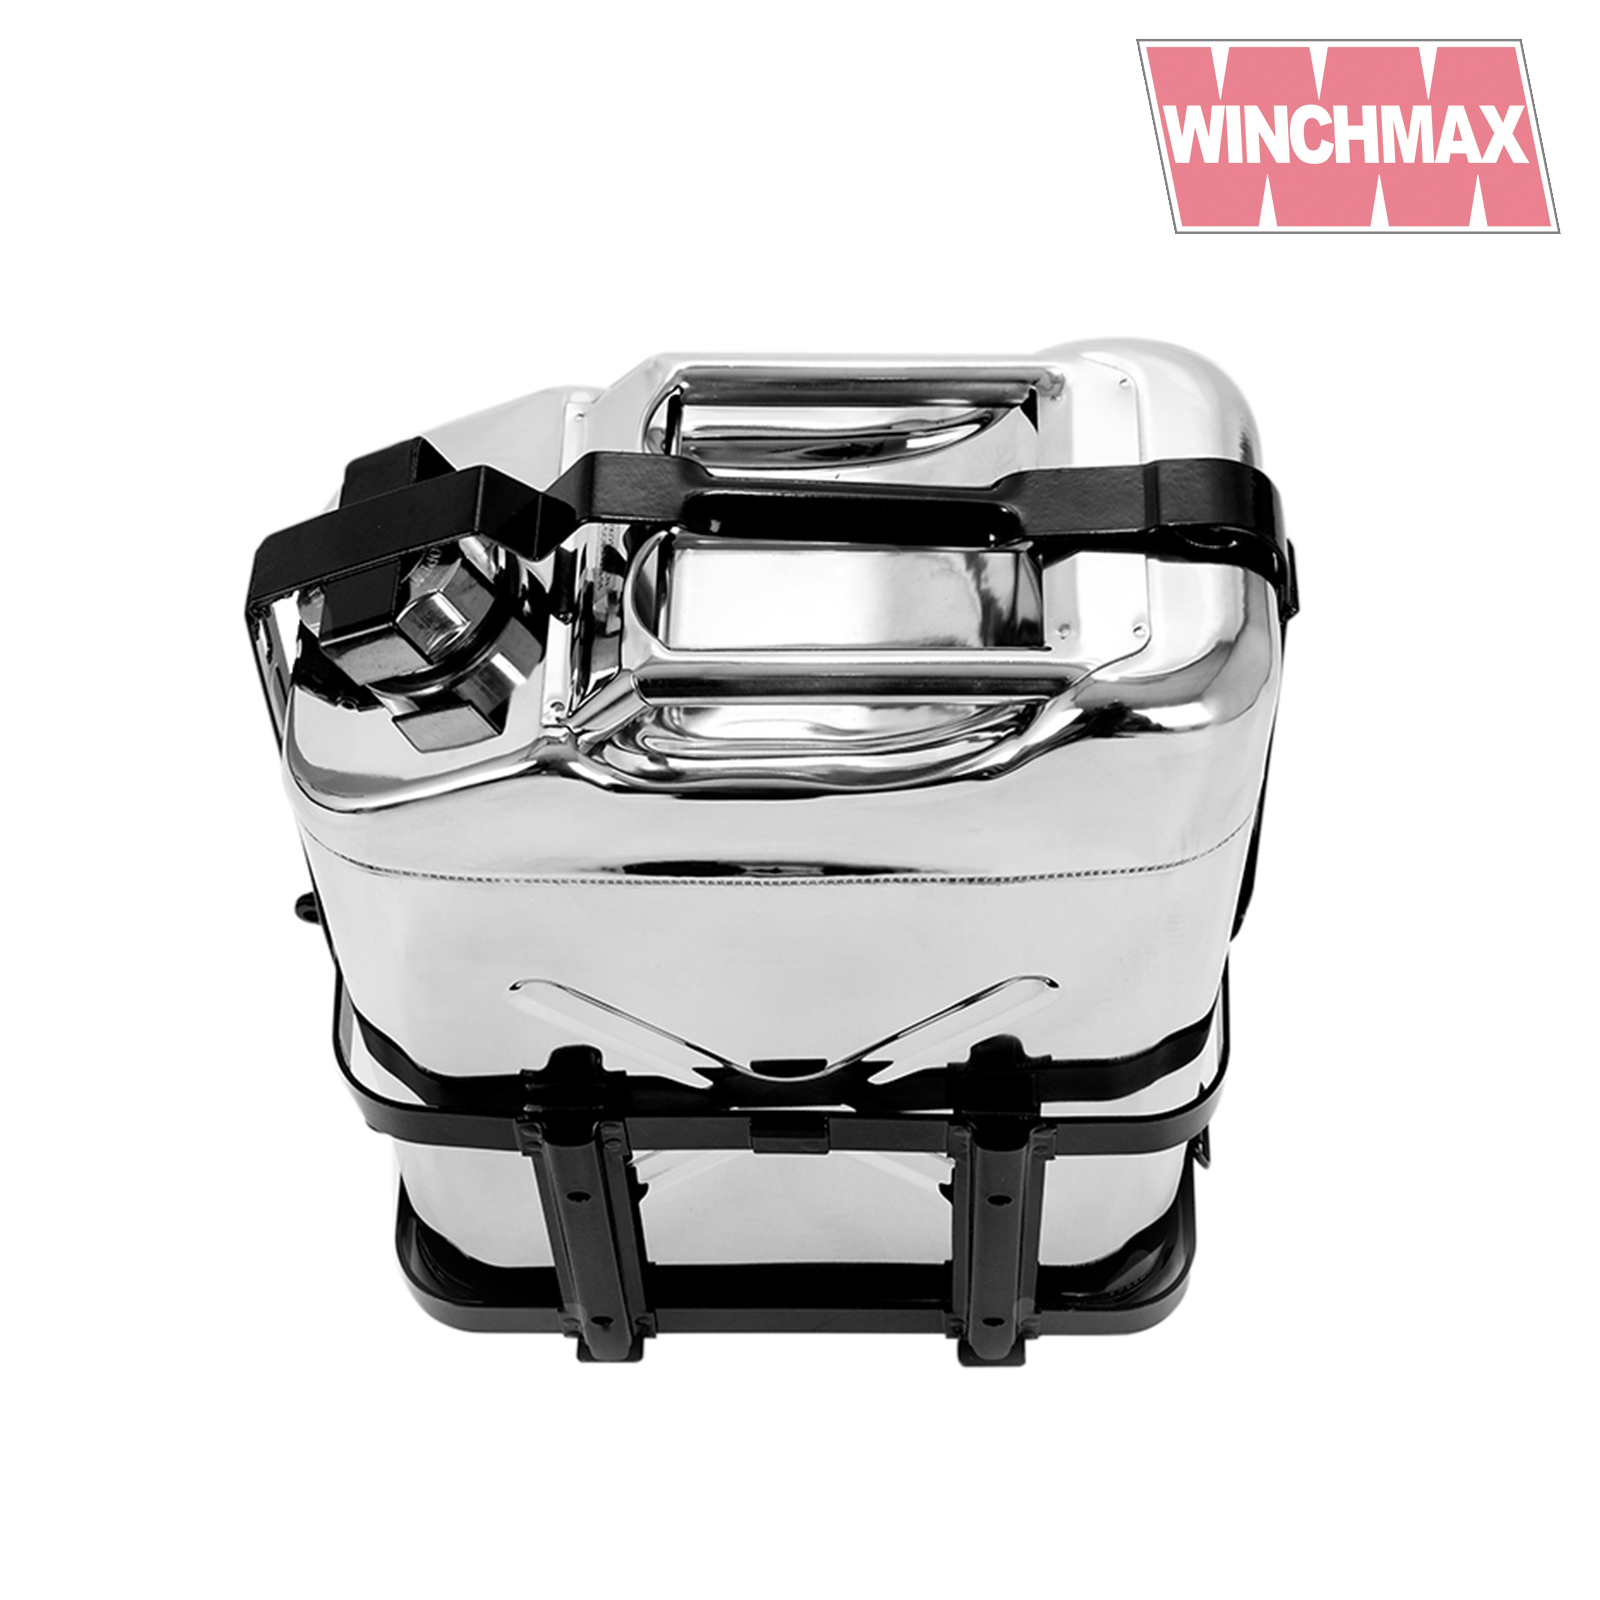 Winchmax Jerry Can Rack Holder